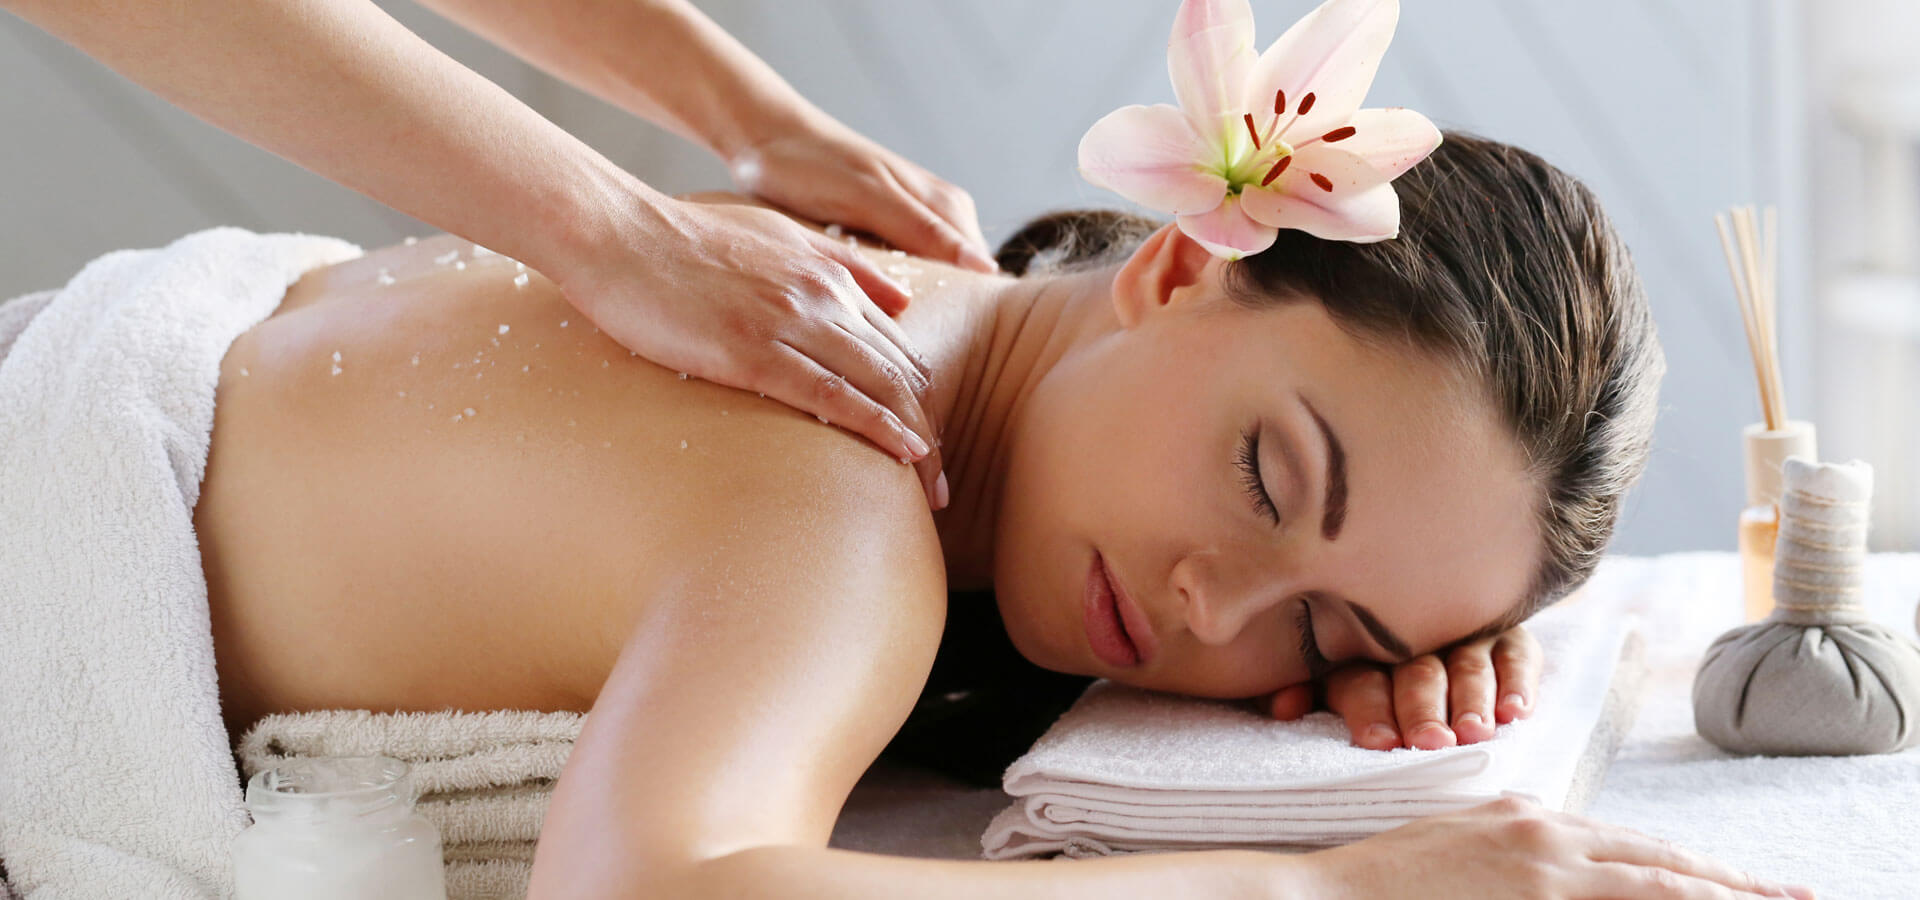 Massage Therapy For Relaxation and Rejuvenation!